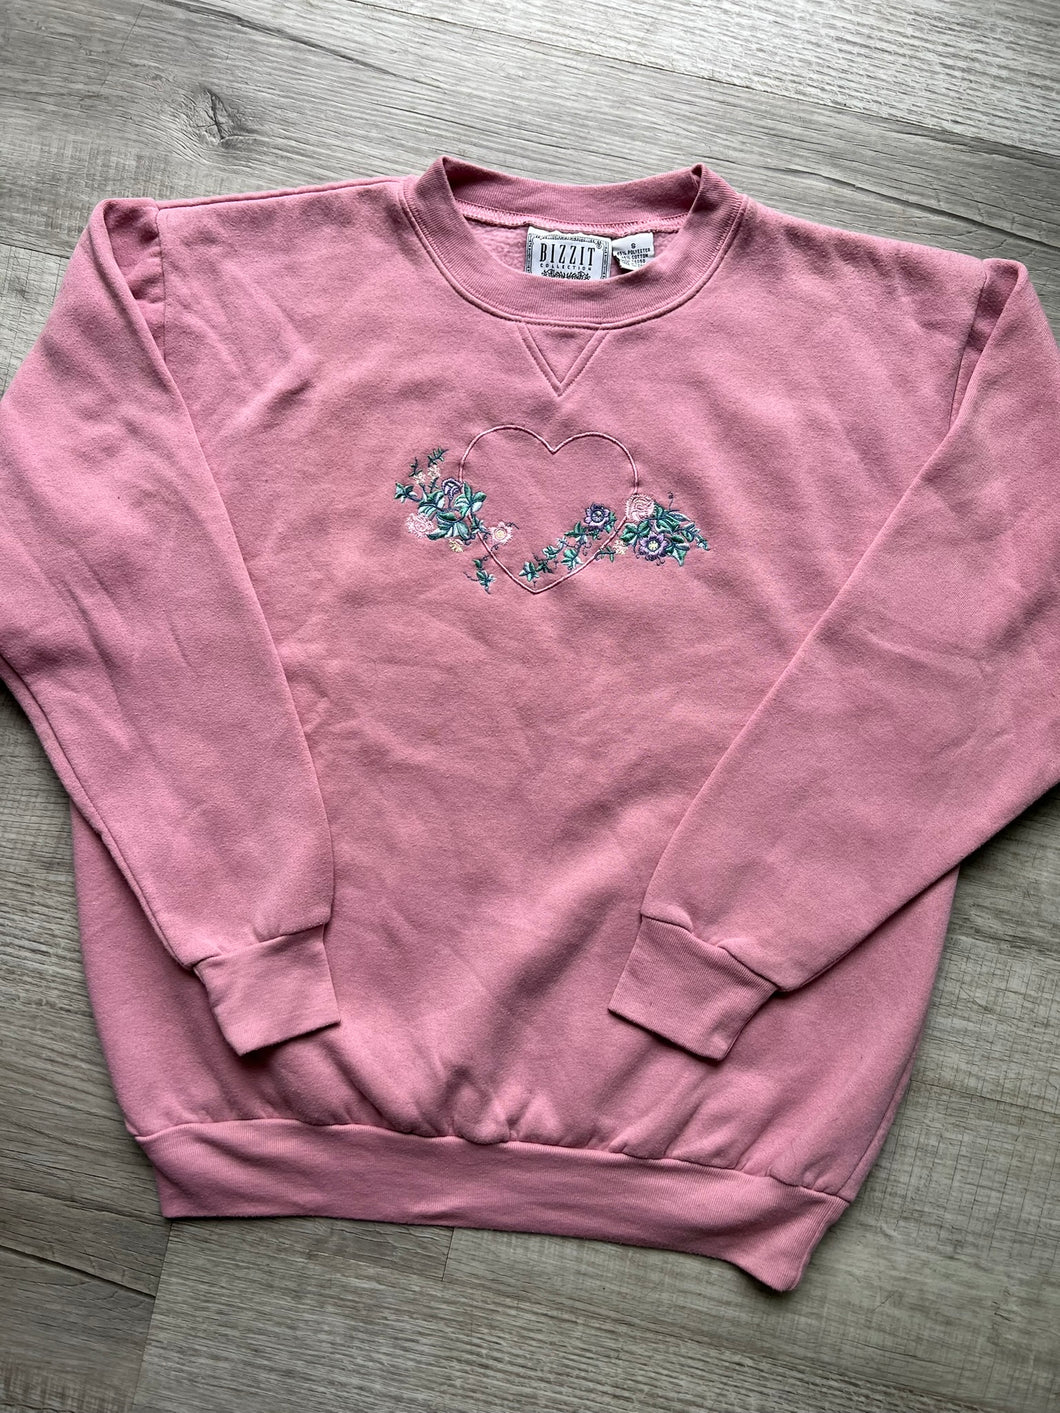 90s Vintage Pink Heart Embroidered Graphic Crewneck